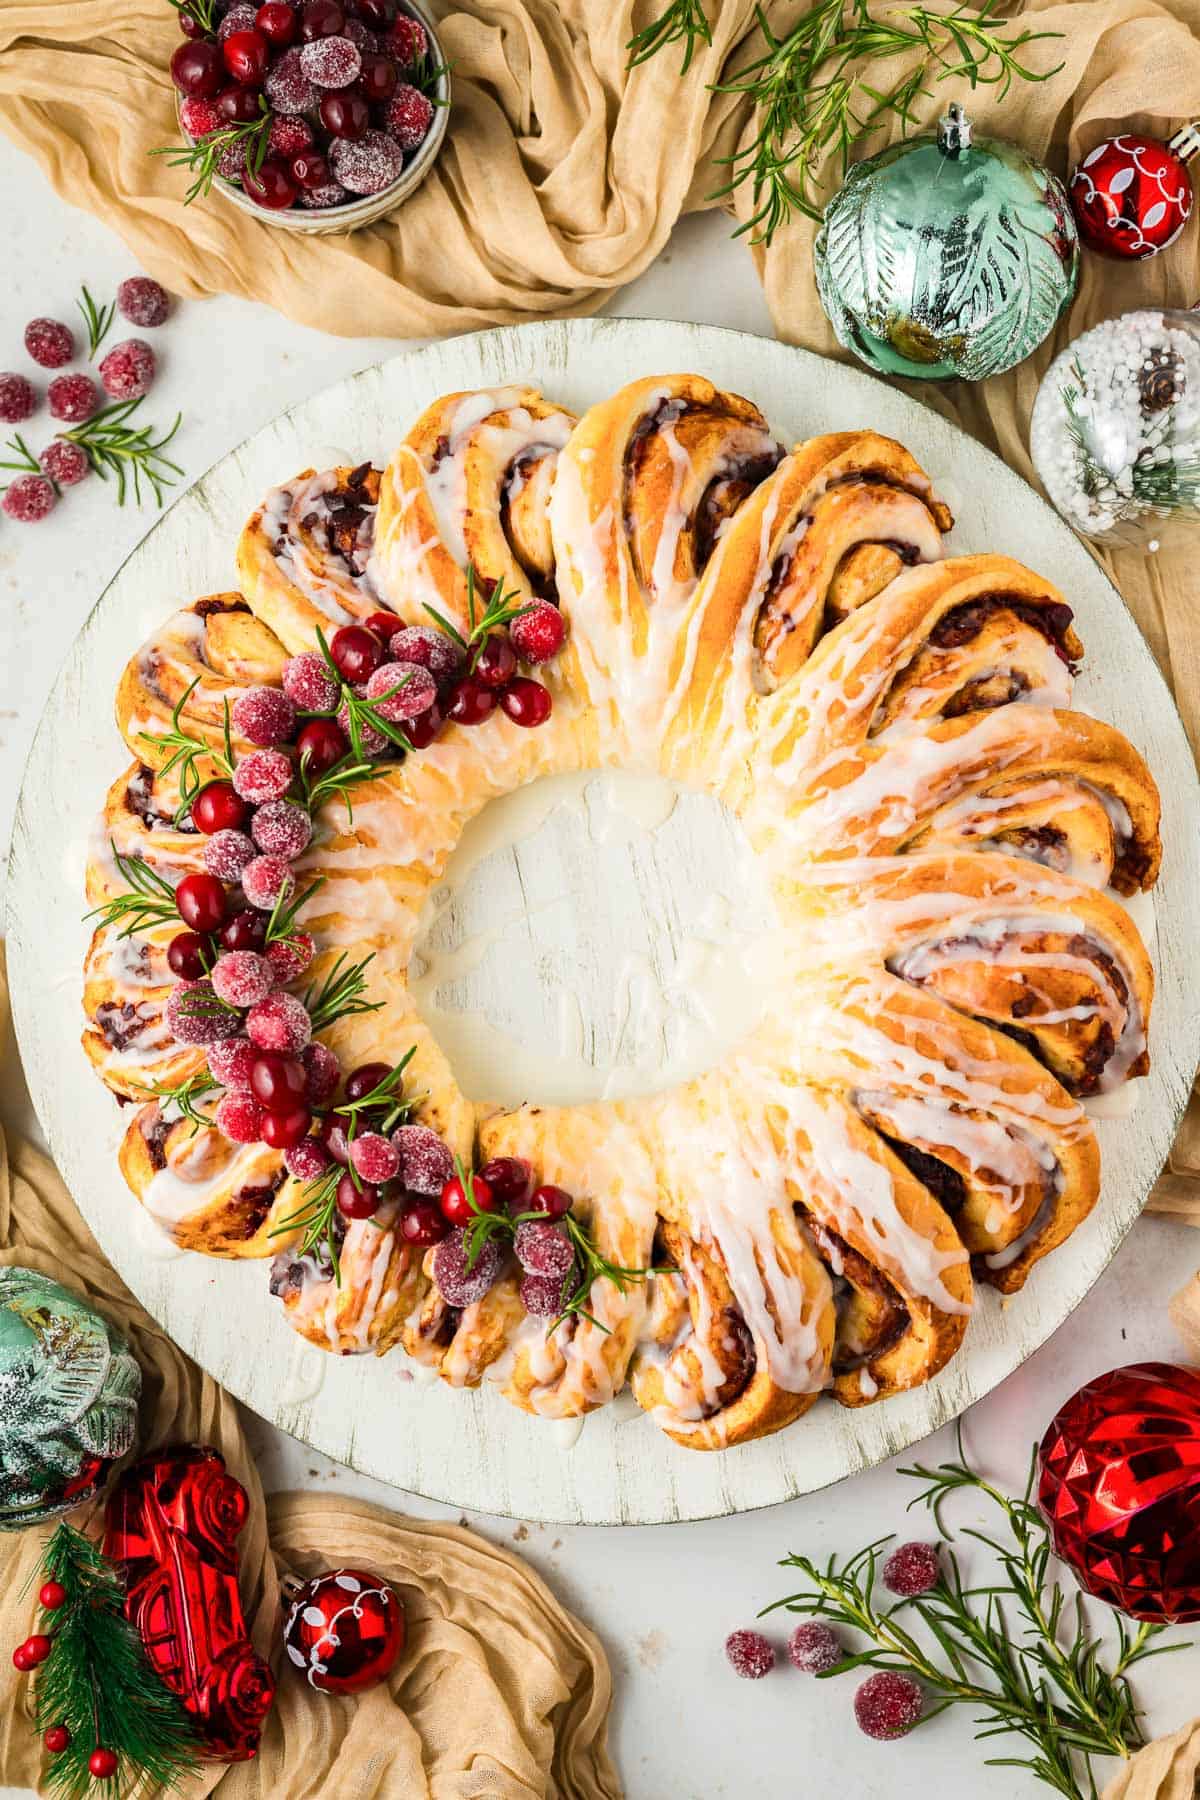 A Cranberry Orange Cinnamon Roll Wreath on a white plate with seasonal ornaments and decor around it.